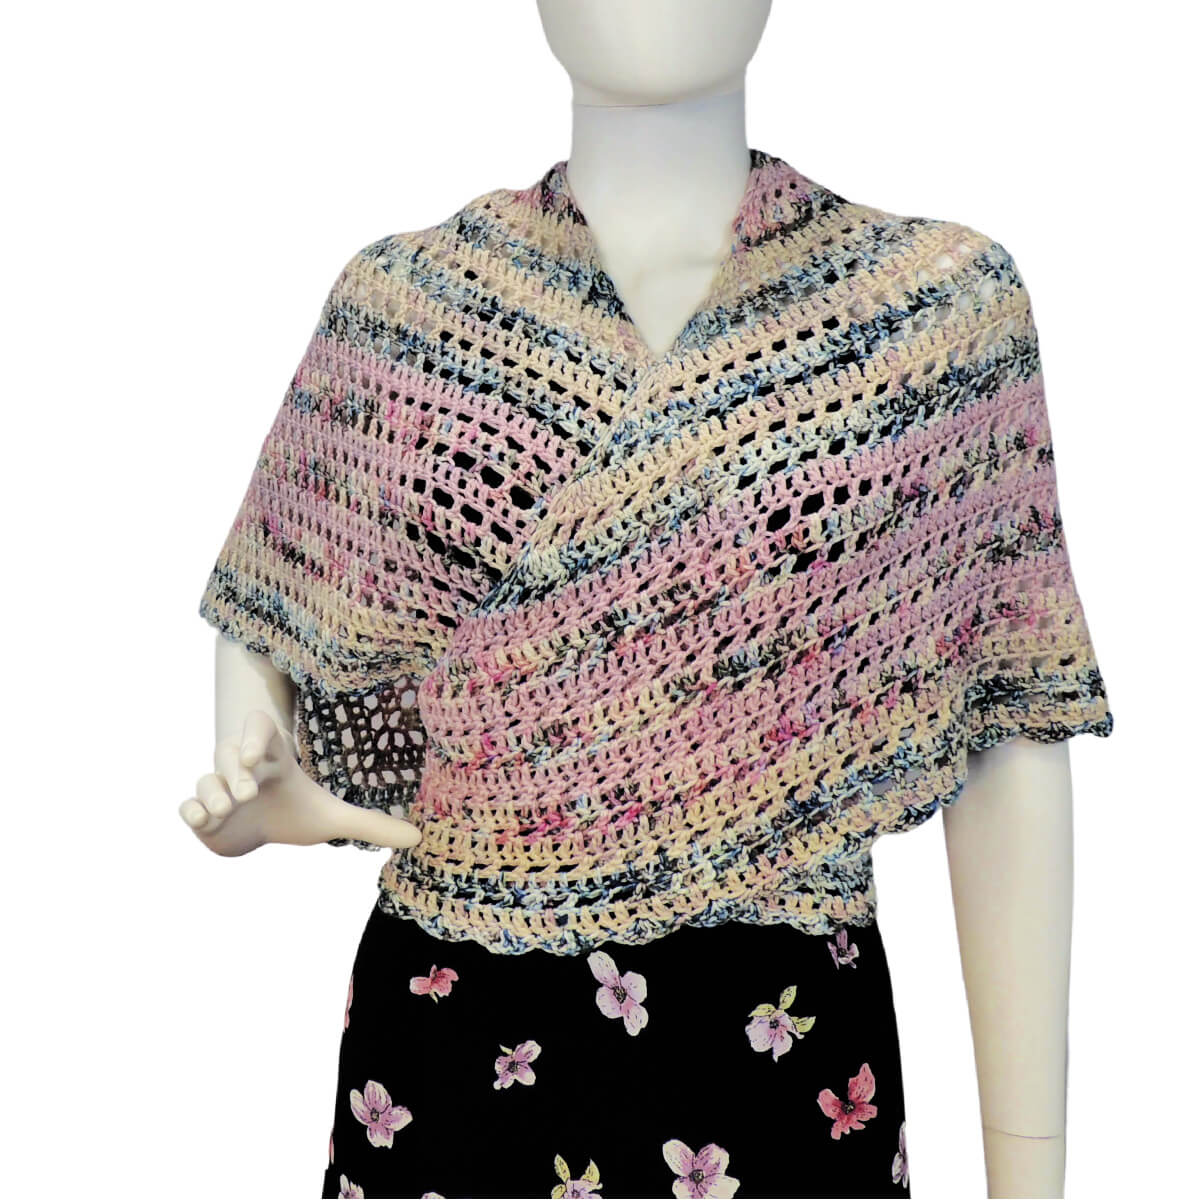 Front view of a white mannequin in a black skirt, black tank top, and a triangular shawl that's almost a 45/45/90 triangle, but is slightly off so all 3 sides and angles are different. The shawl is crocheted in alternating rows of solid stitches and mesh stitches in yarn lightly colored in shades of pale pink, pale blue and pale yellow. The 2 shorter of the 3 sides have a scalloped border. The center of the long side of the shawl is behind the neck and the two sides wrap one at a time around the front then around to the back so they overlap in front.